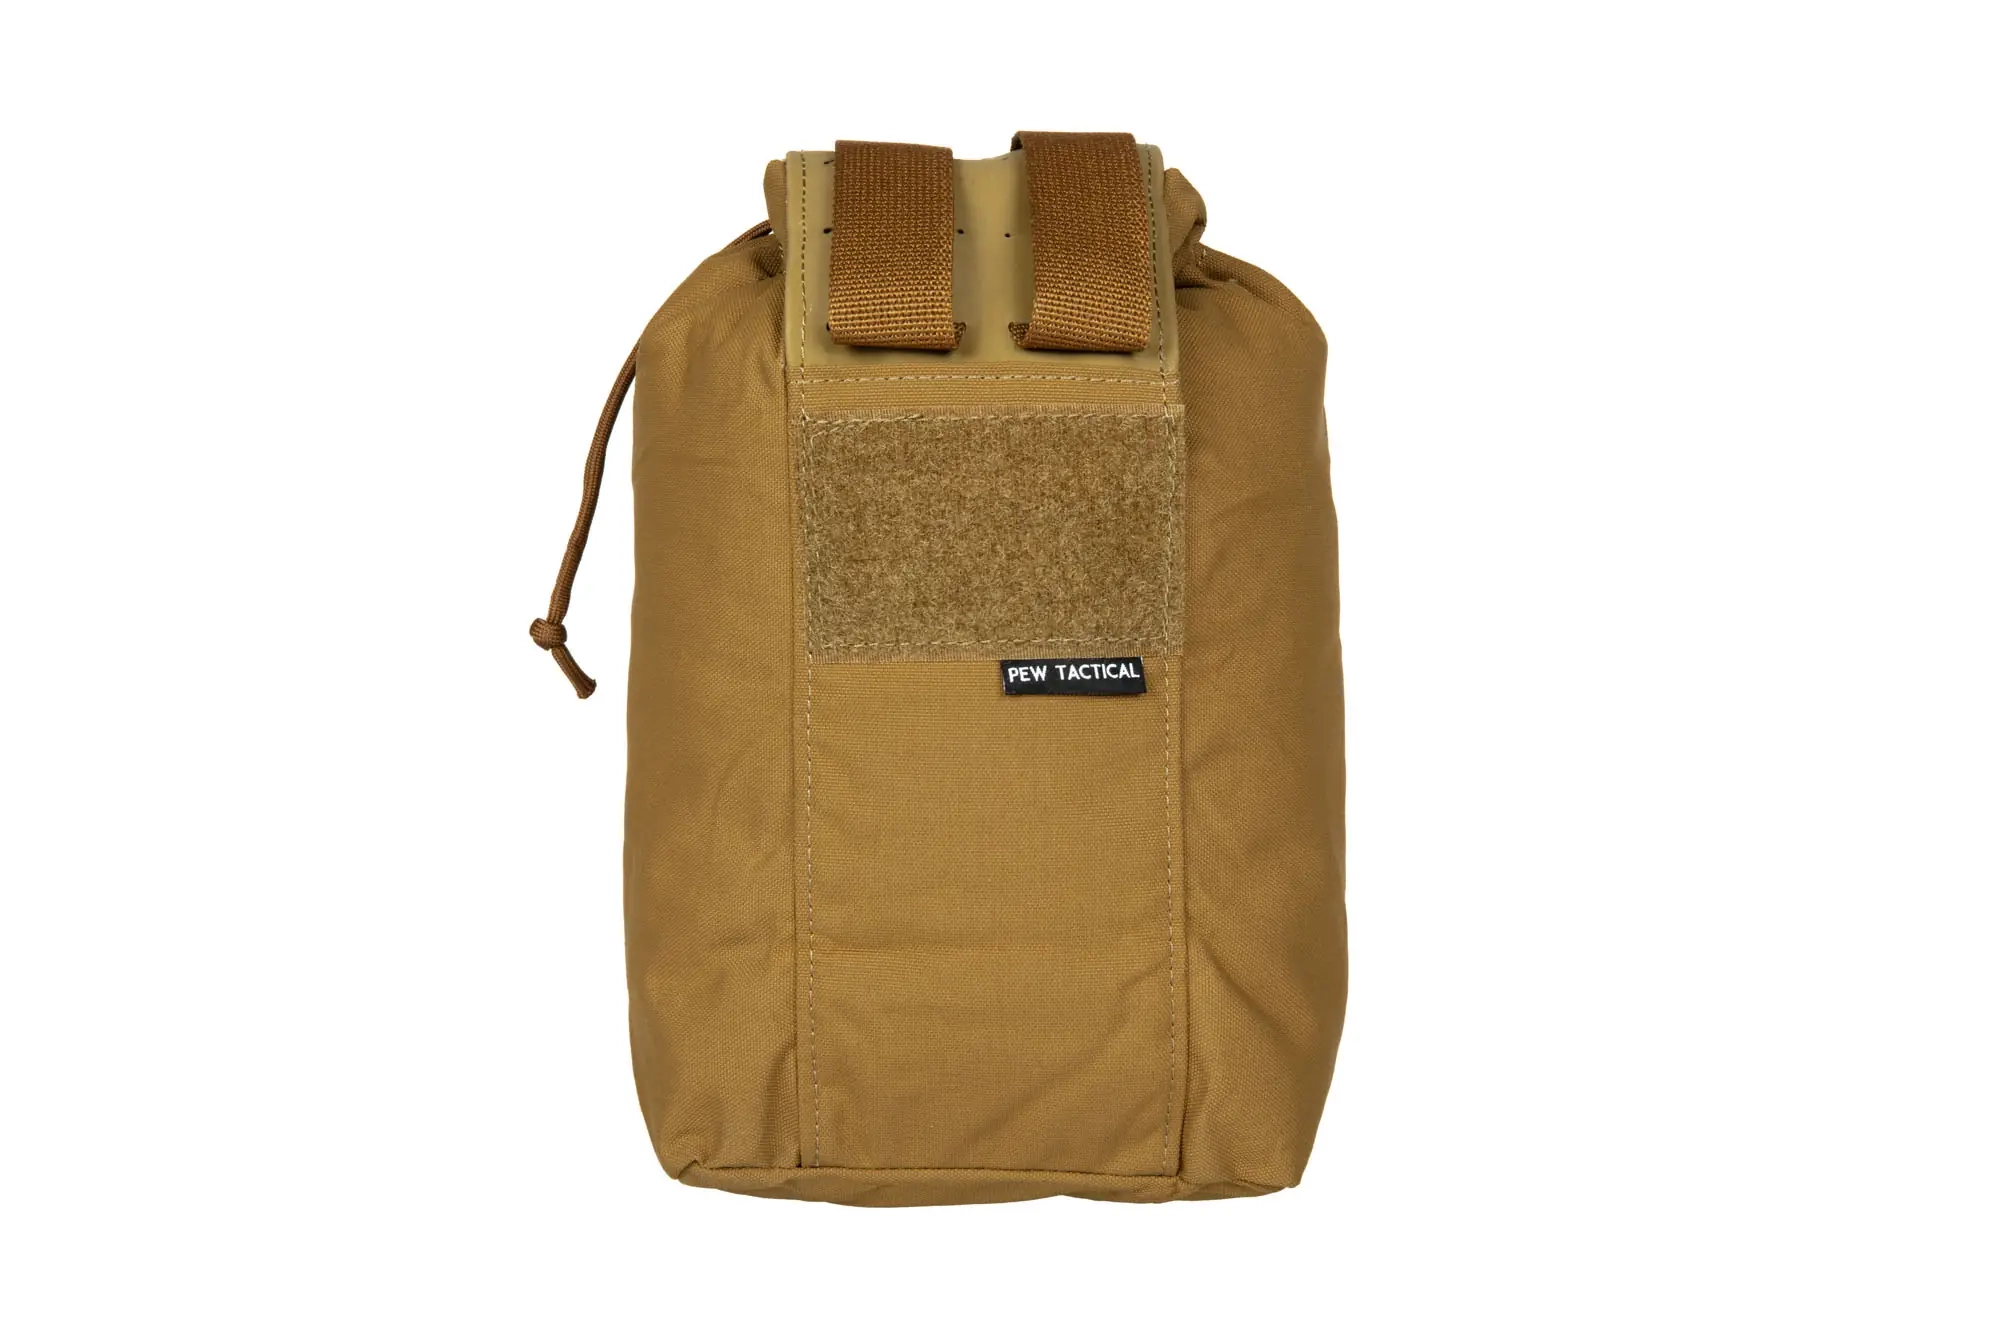 MINI Foldable Magdump pouch - Coyote Brown